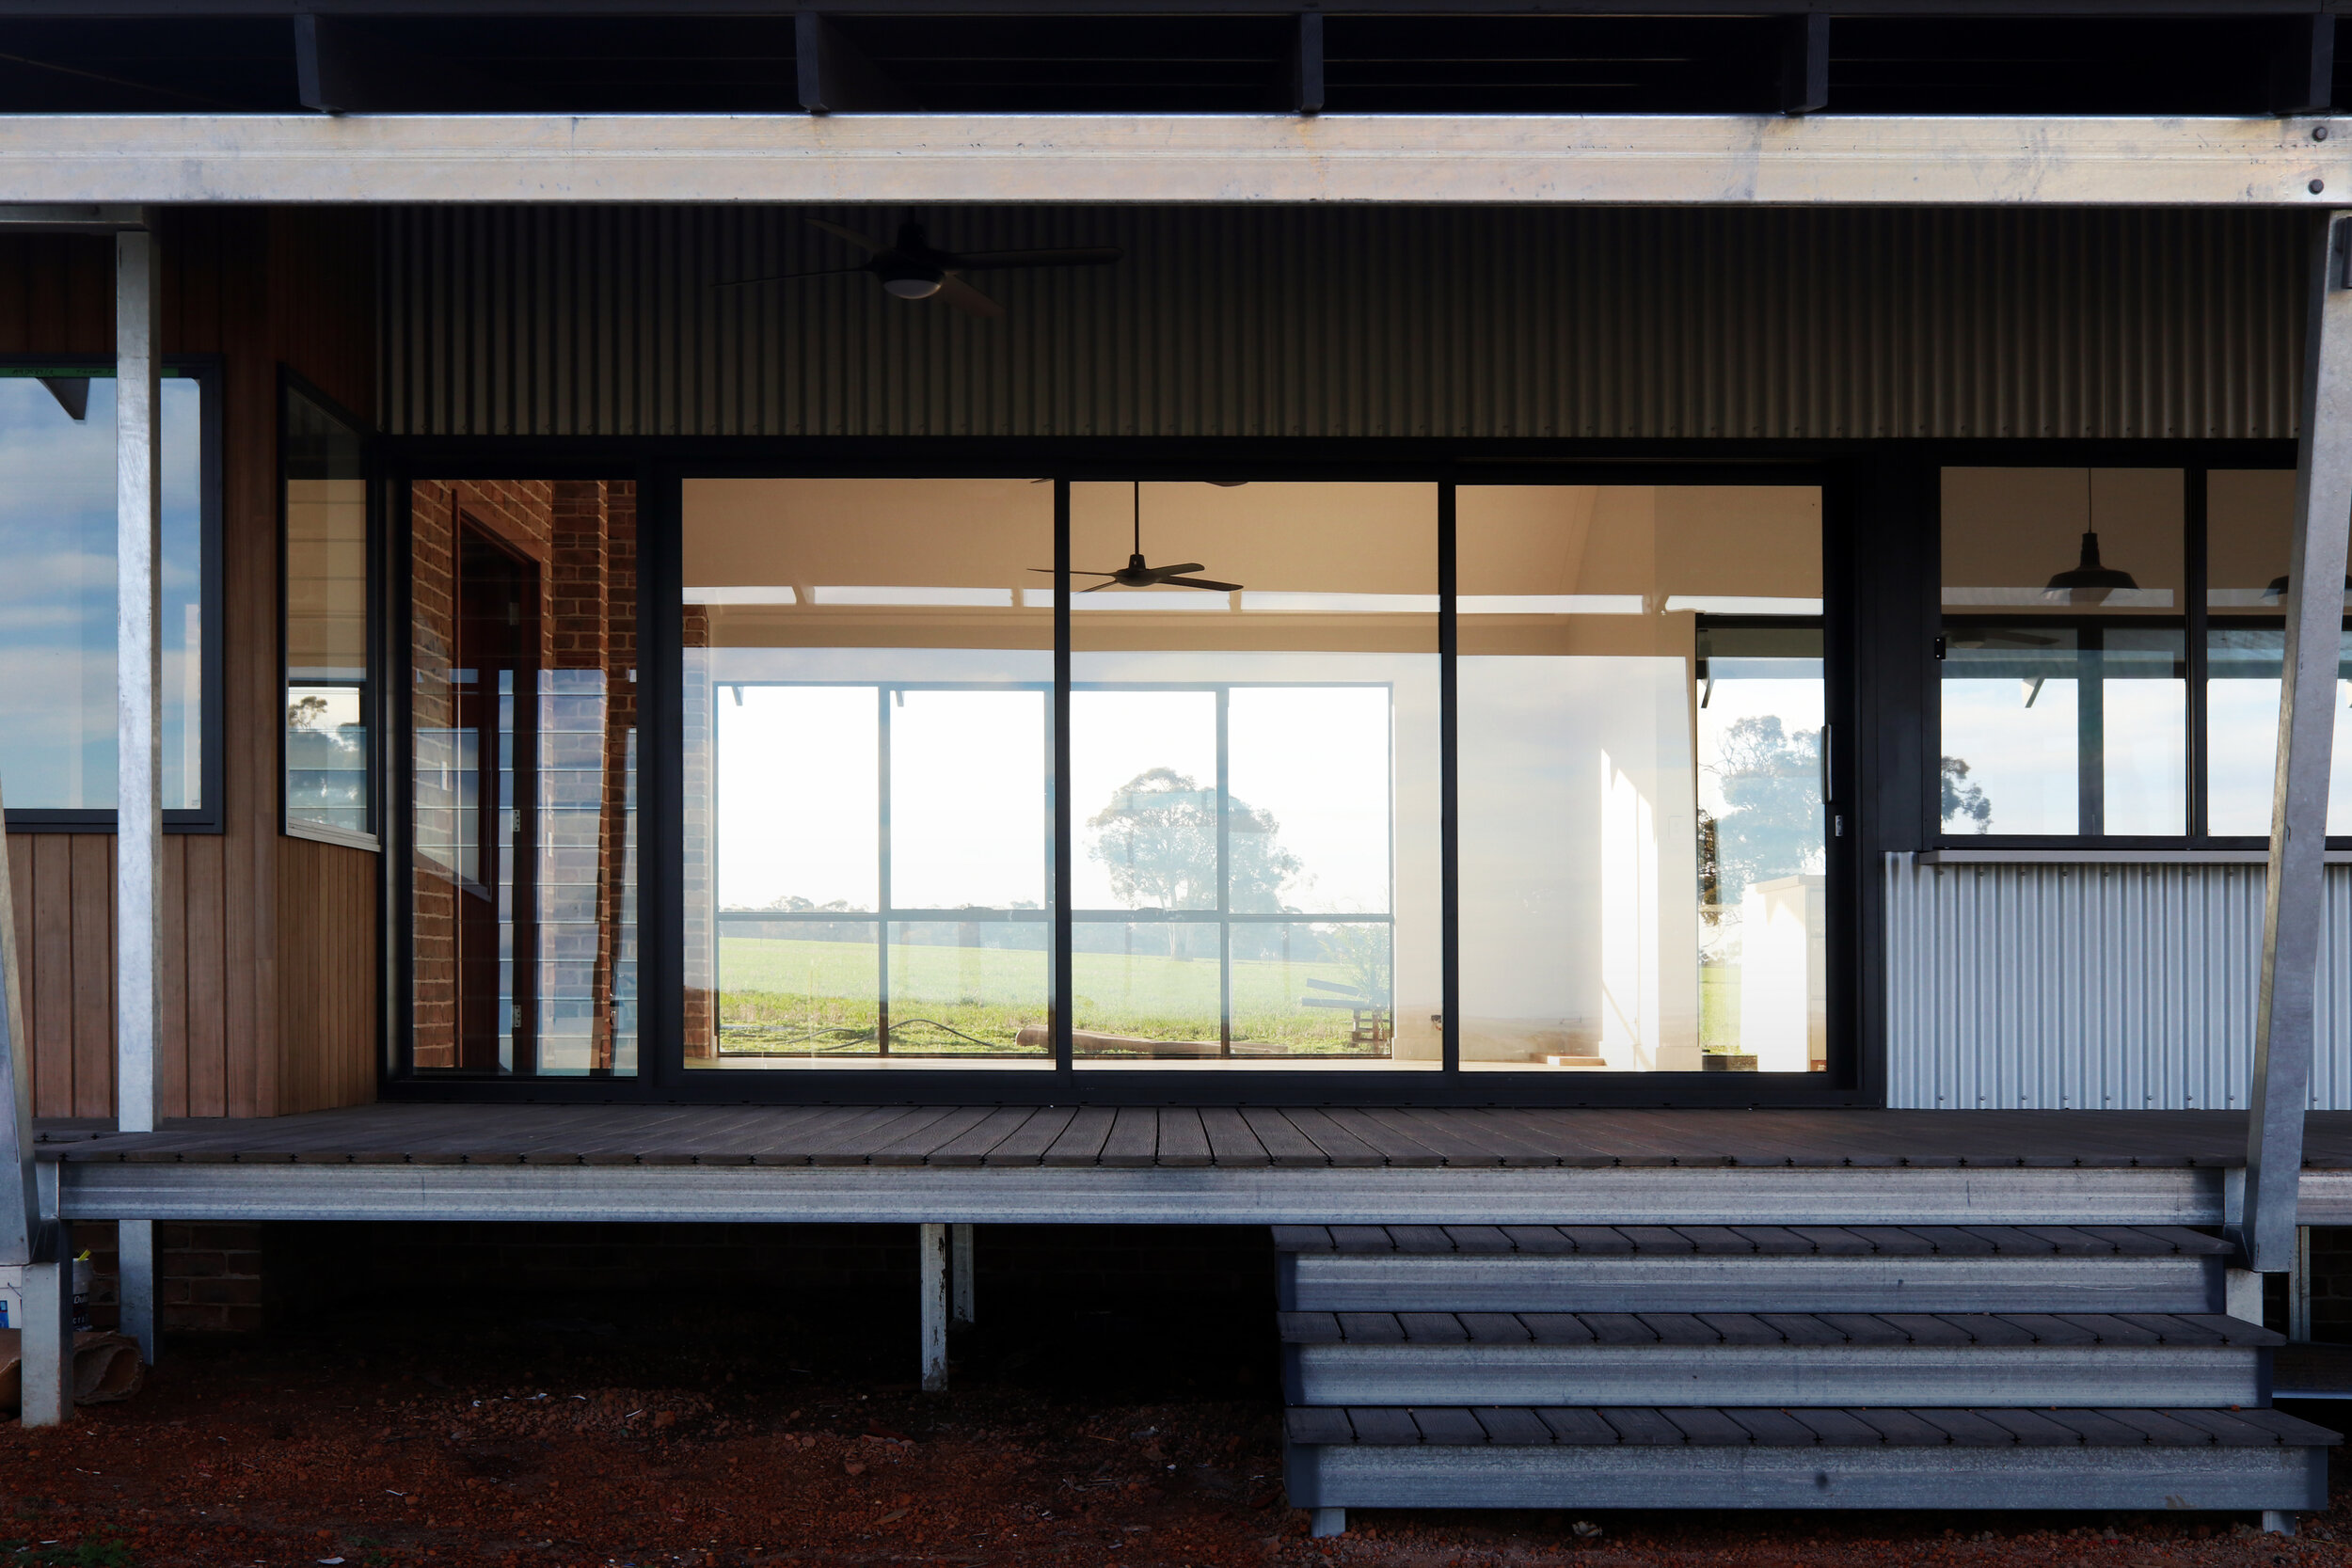 The Shearing Shed House â€